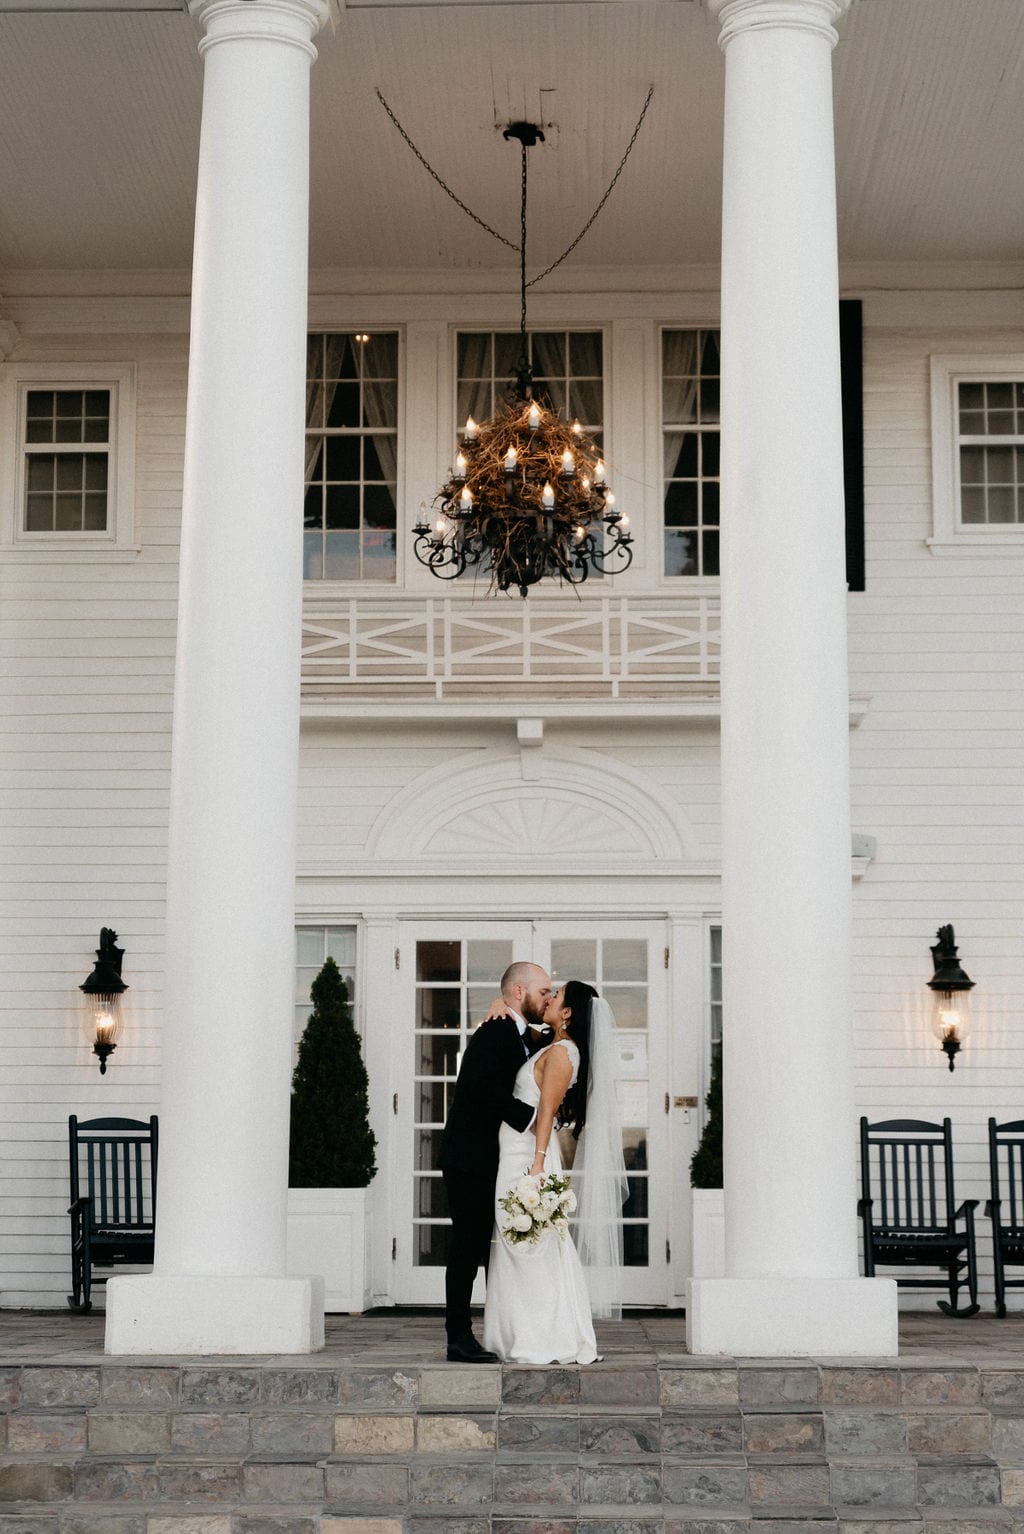 Bride and Groom Kissing at The Manor House on the porch